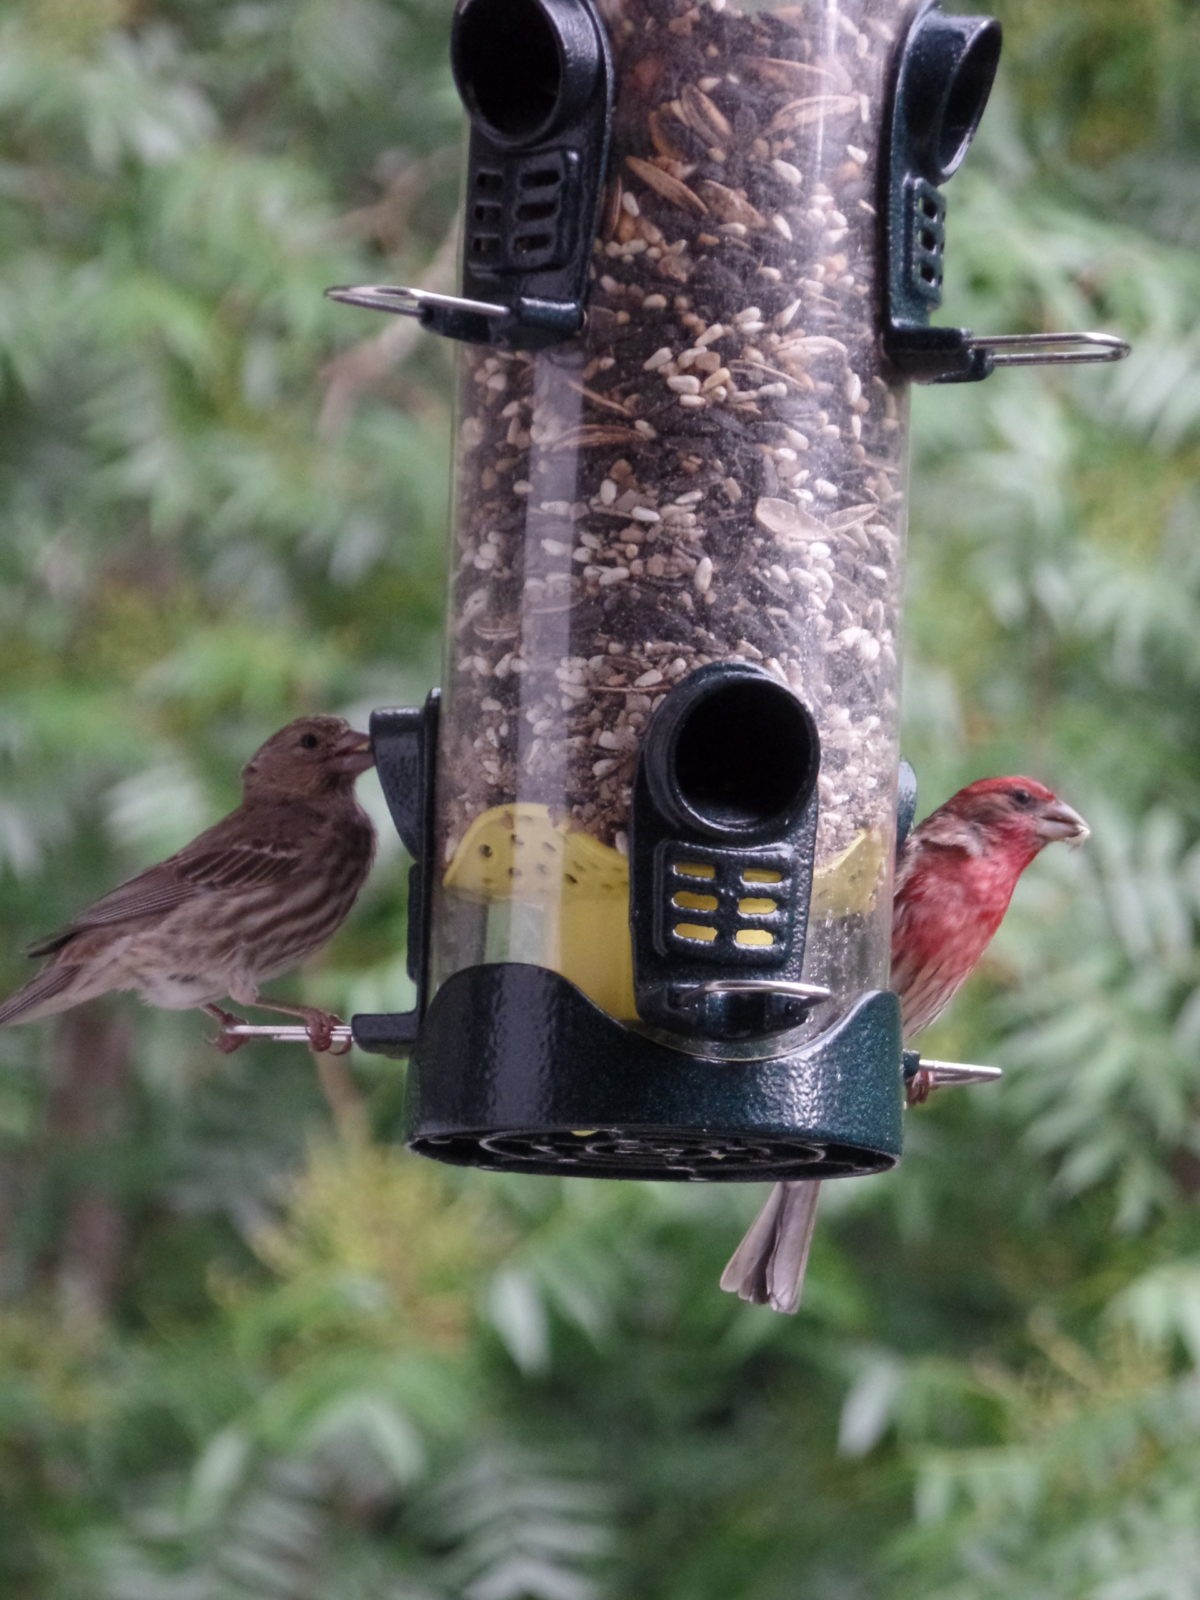 Male and Female House Finch at a bird feeder